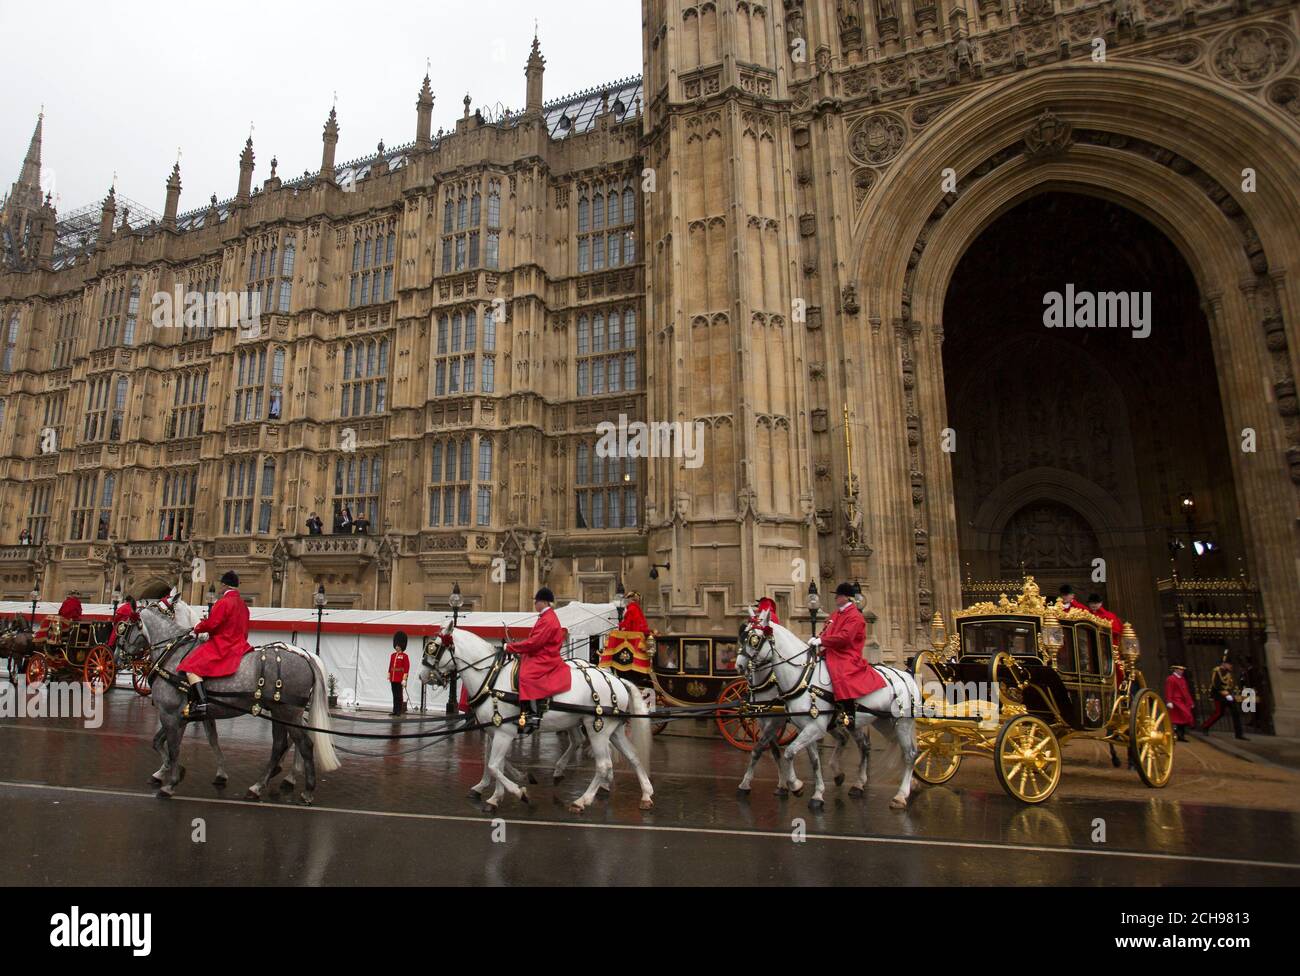 Queen Elizabeth II and the Duke of Edinburgh leave the Houses of Parliament in the Diamond Jubilee state coach after the State Opening of Parliament, in the House of Lords at the Palace of Westminster in London. Stock Photo